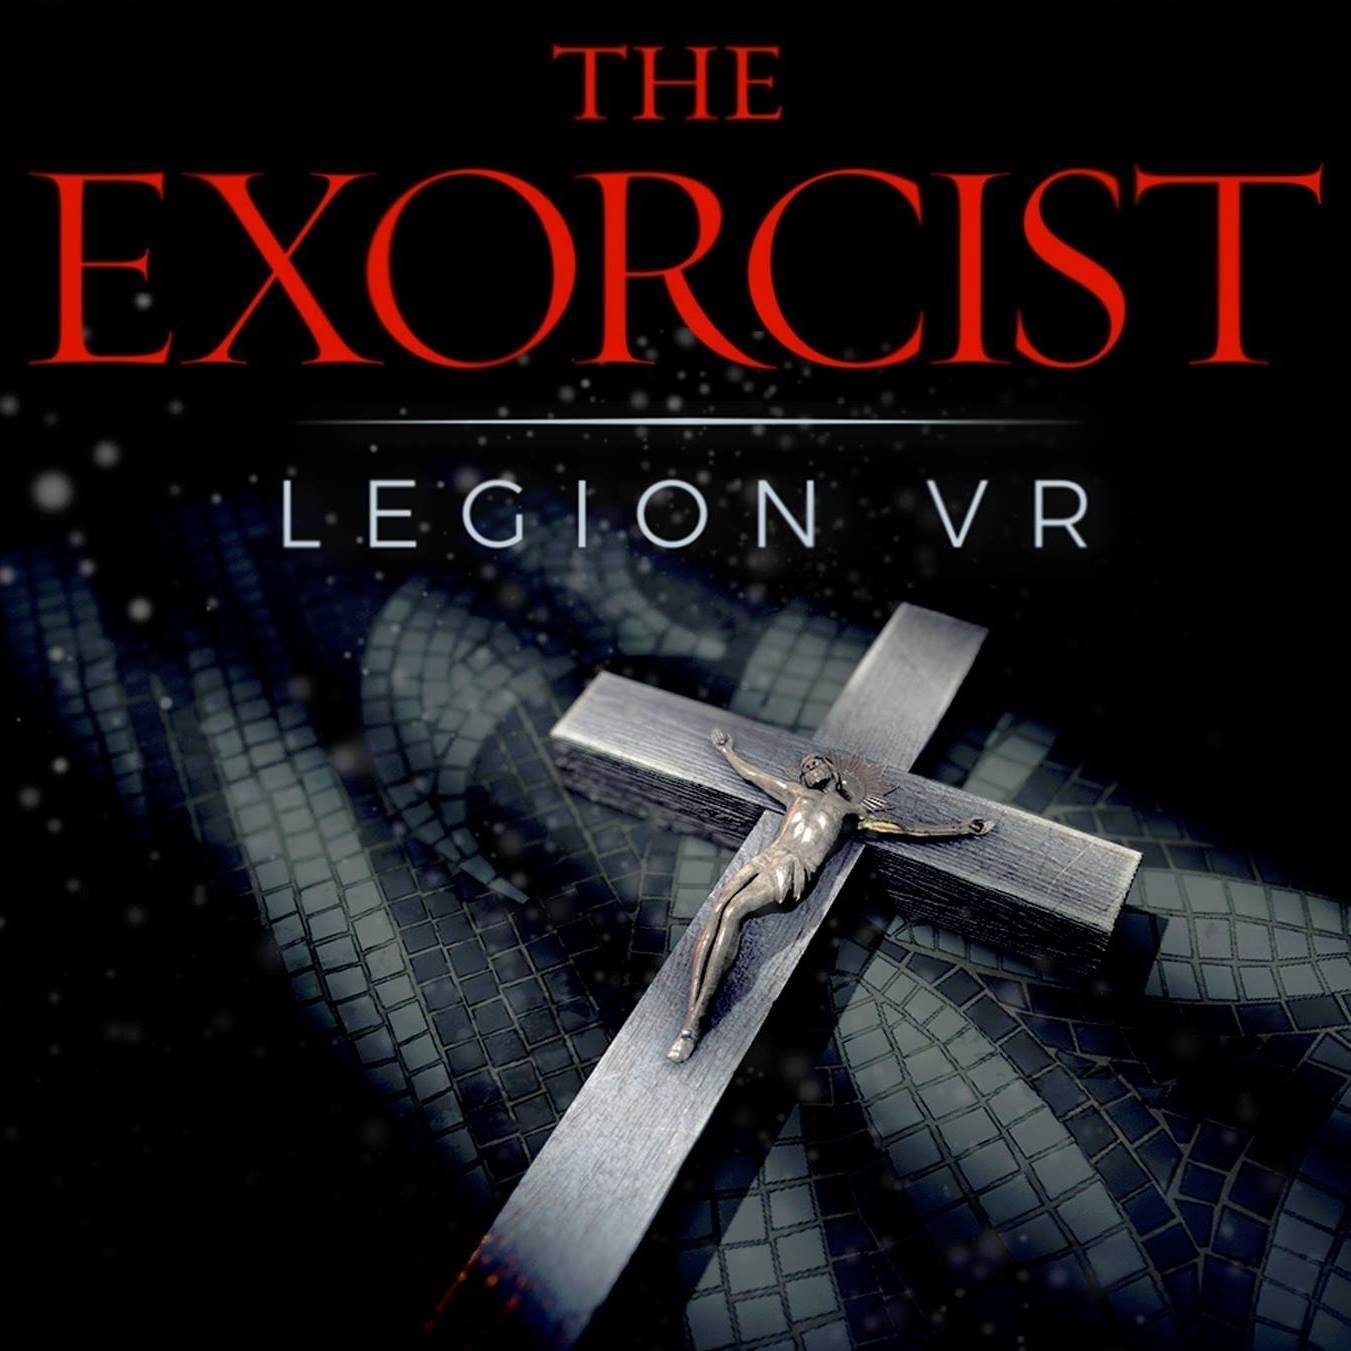 the-exorcist-legion-vr-chapter-1-first-rites-video-game-box-art-id-323688-image-abyss